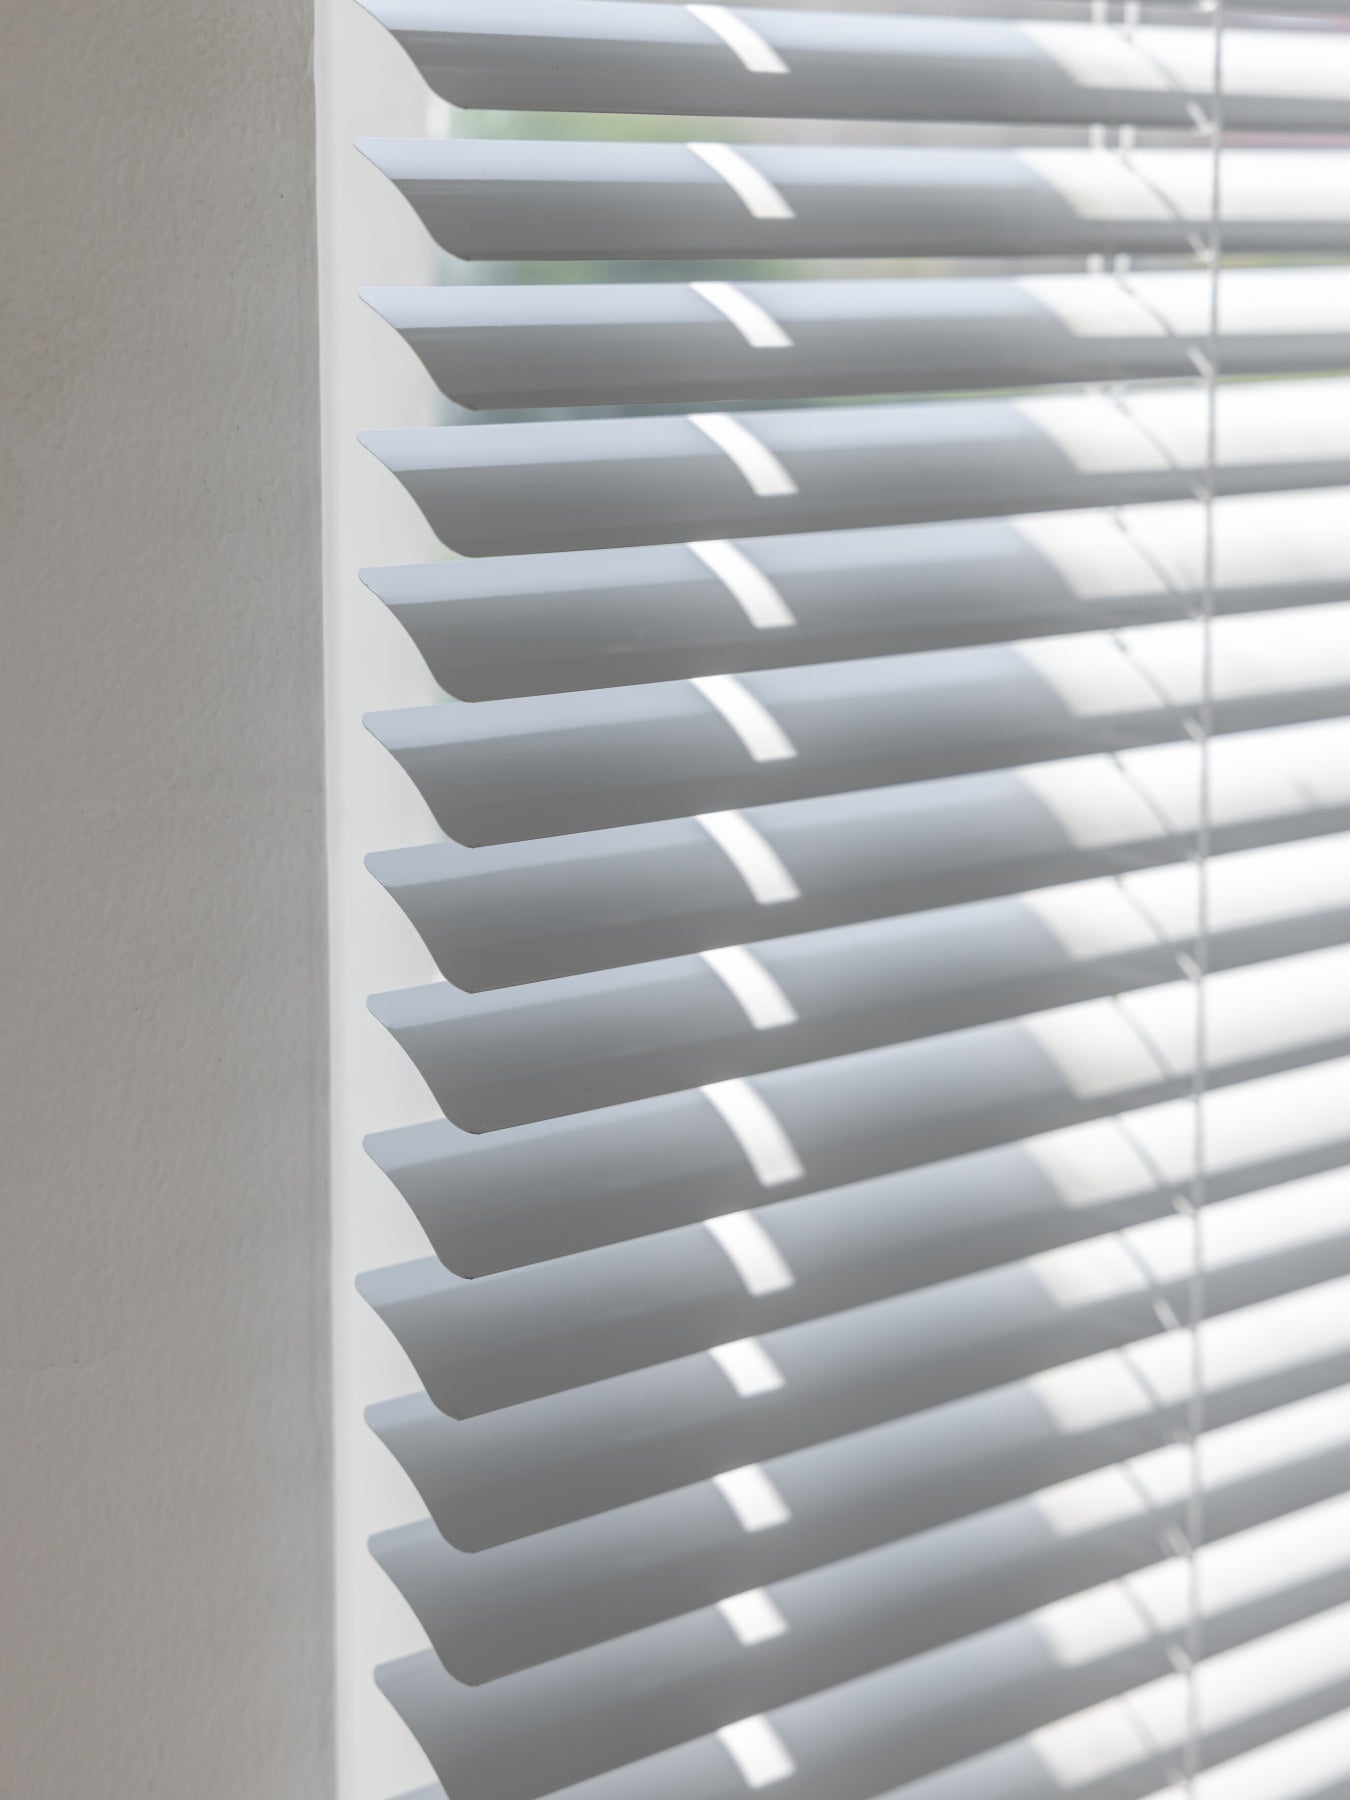 White vinyl mini blinds partially opened, casting soft shadows on a wall, showcasing simplistic design and functionality